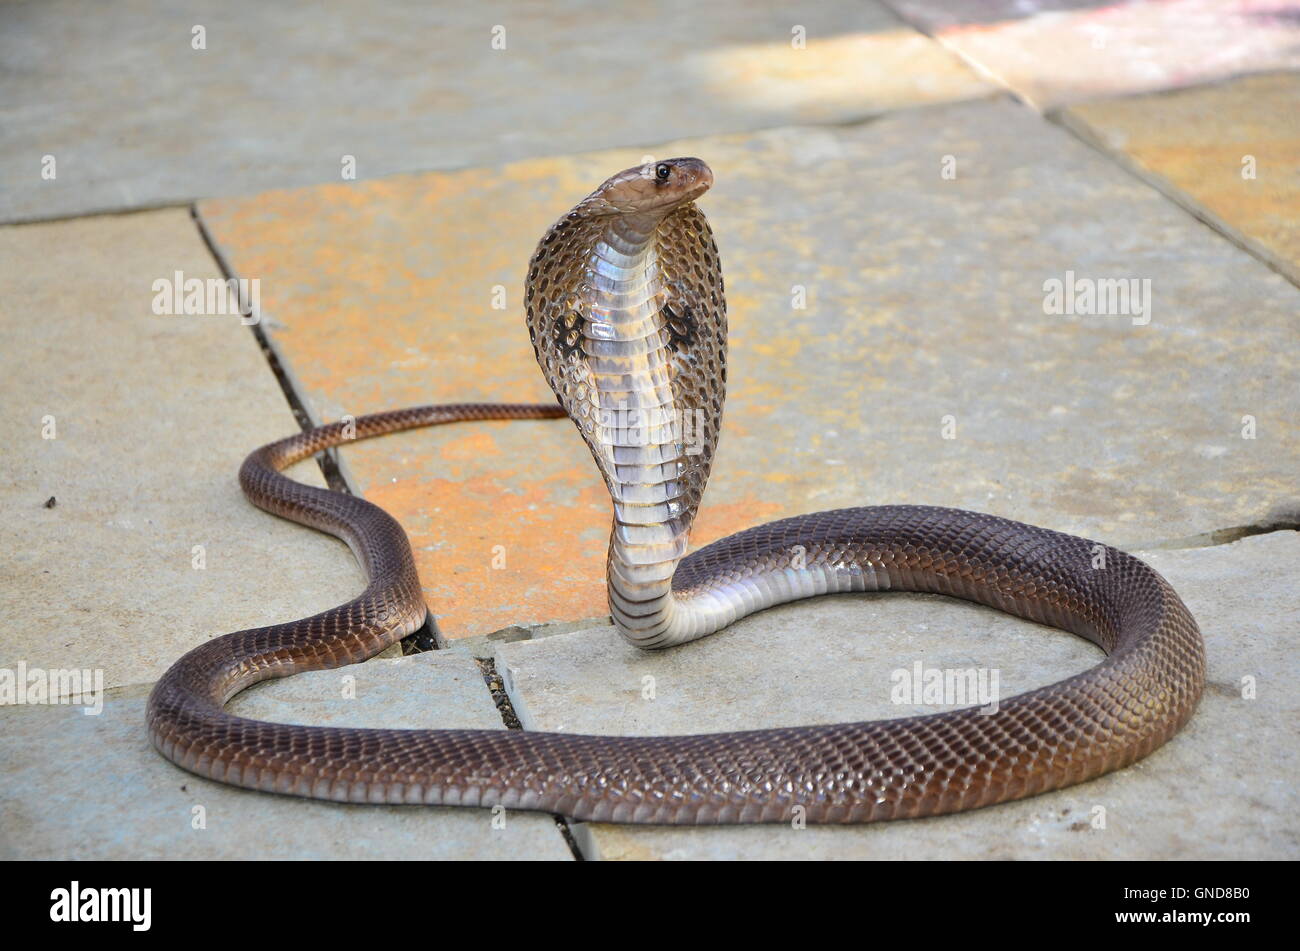 Indian Spectacled Cobra. Foto Stock